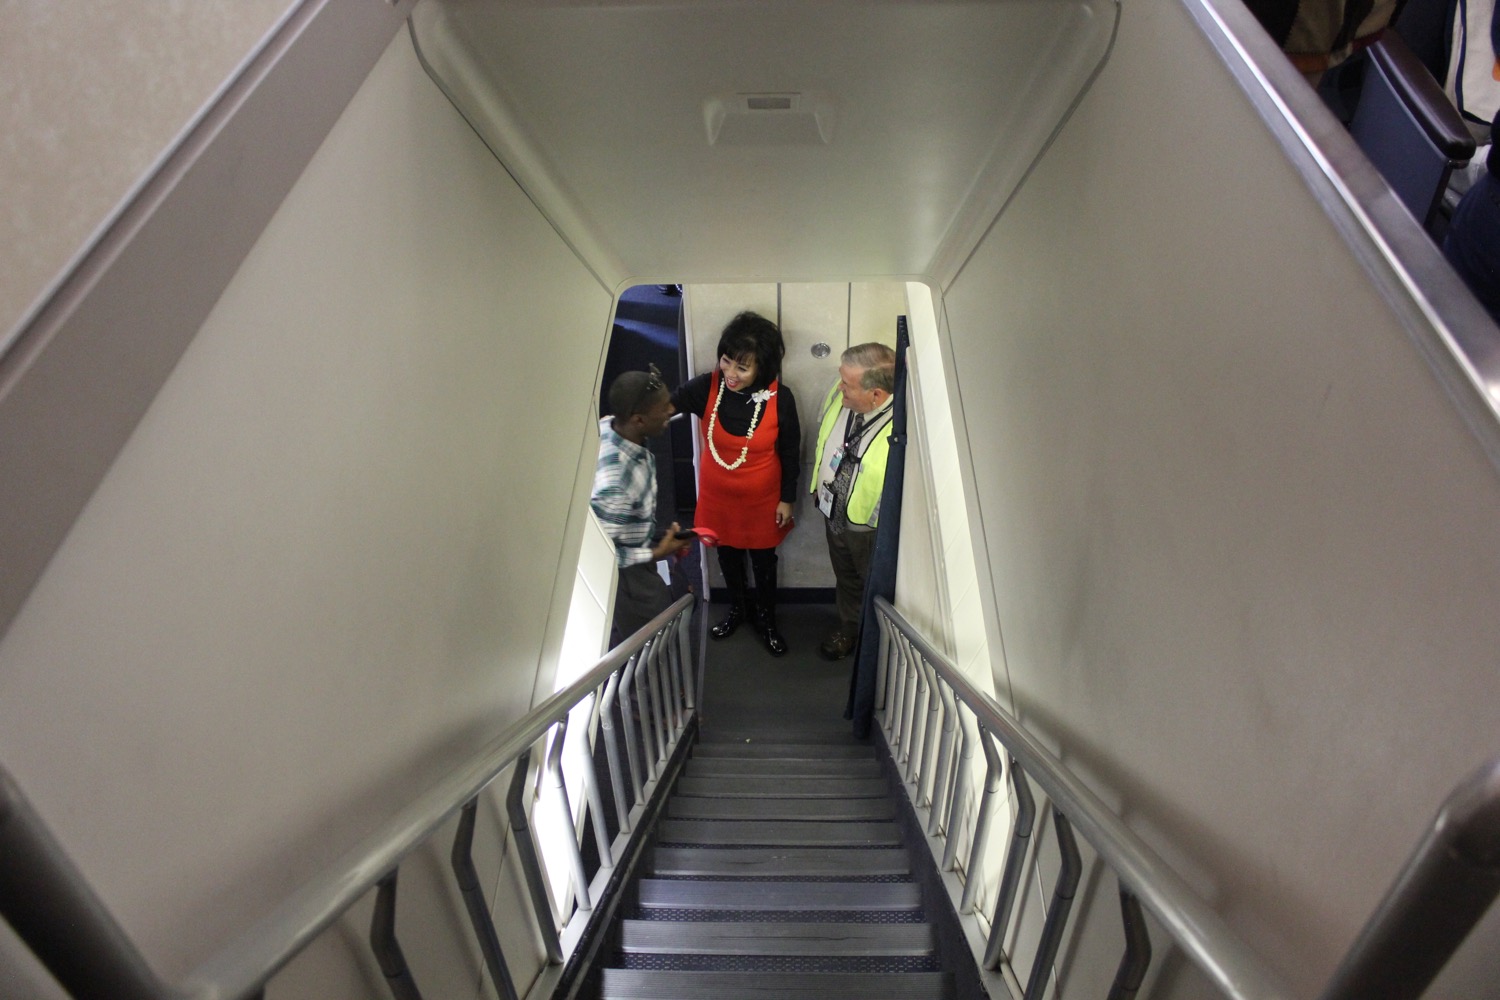 a group of people standing on a plane stairs